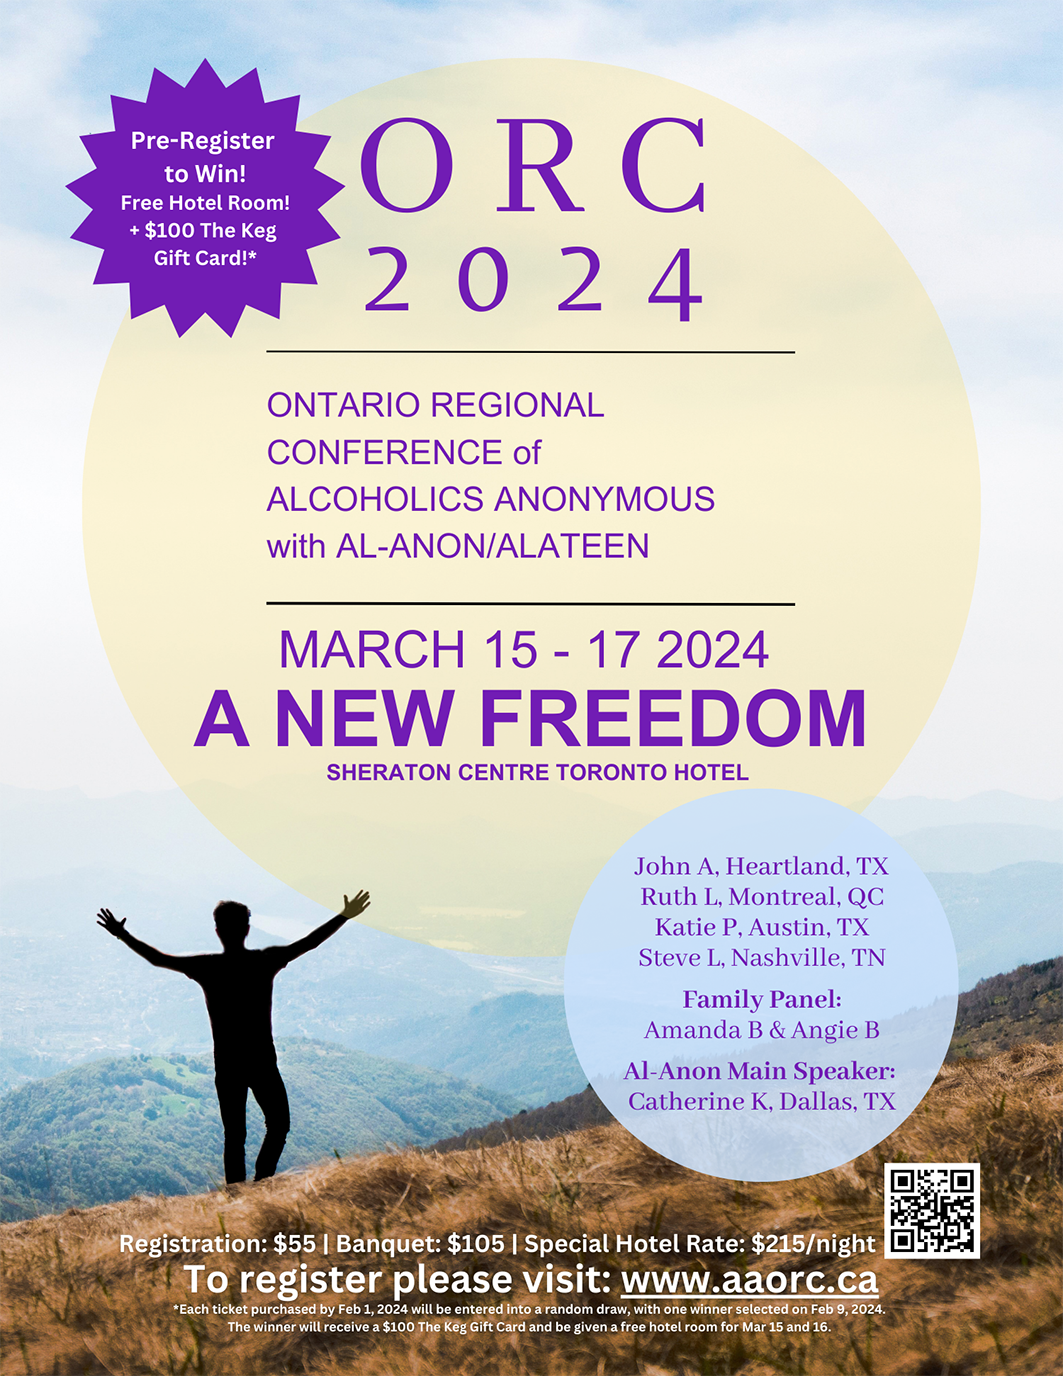 Home ORC Ontario Regional Conference of Alcoholics Anonymous